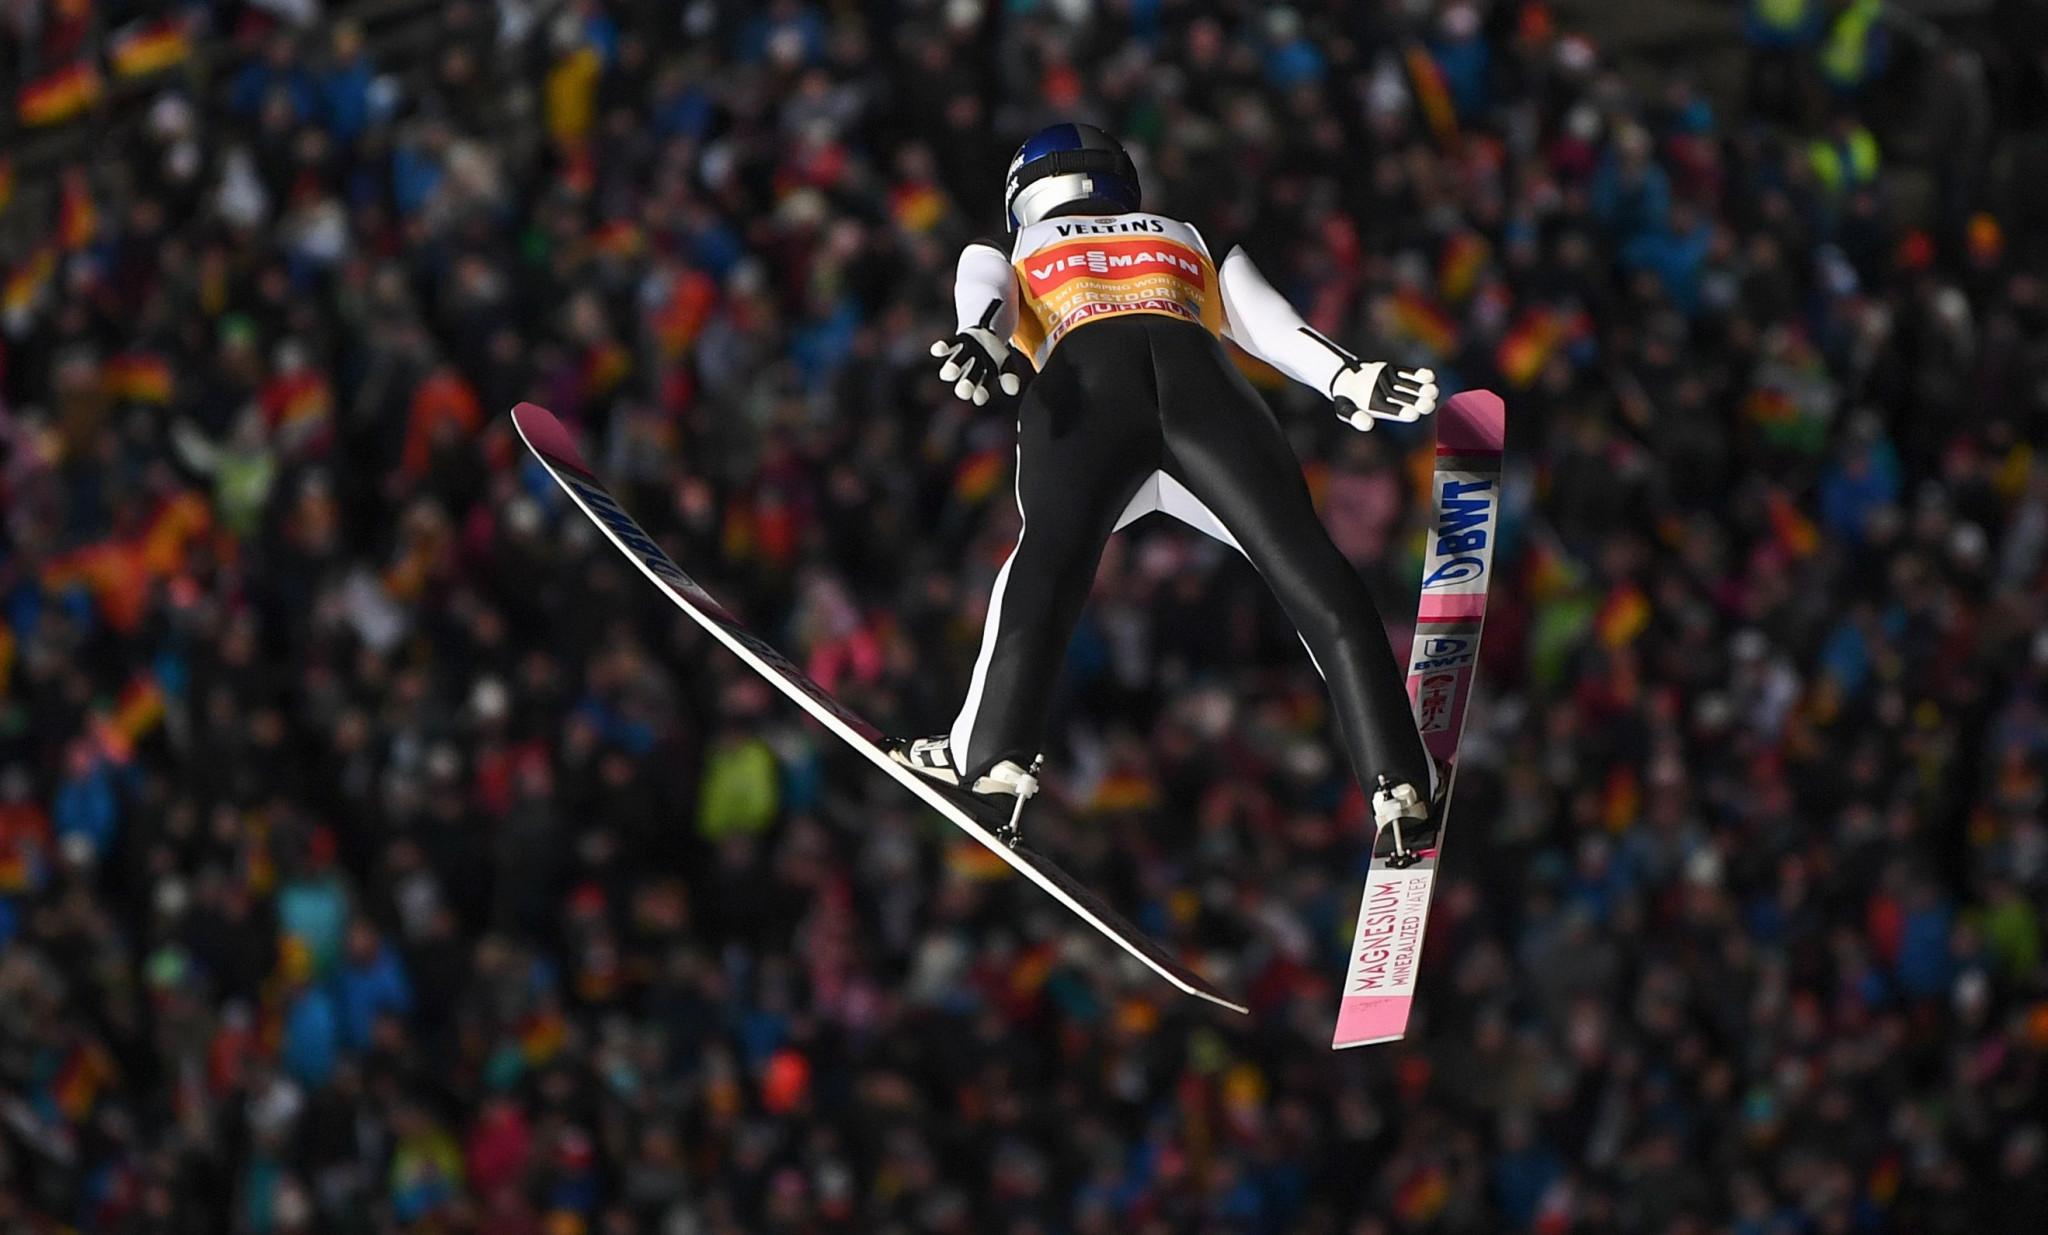 Ryoyu Kobayashi has extended his lead in the FIS Ski Jumping World Cup standings ©Getty Images